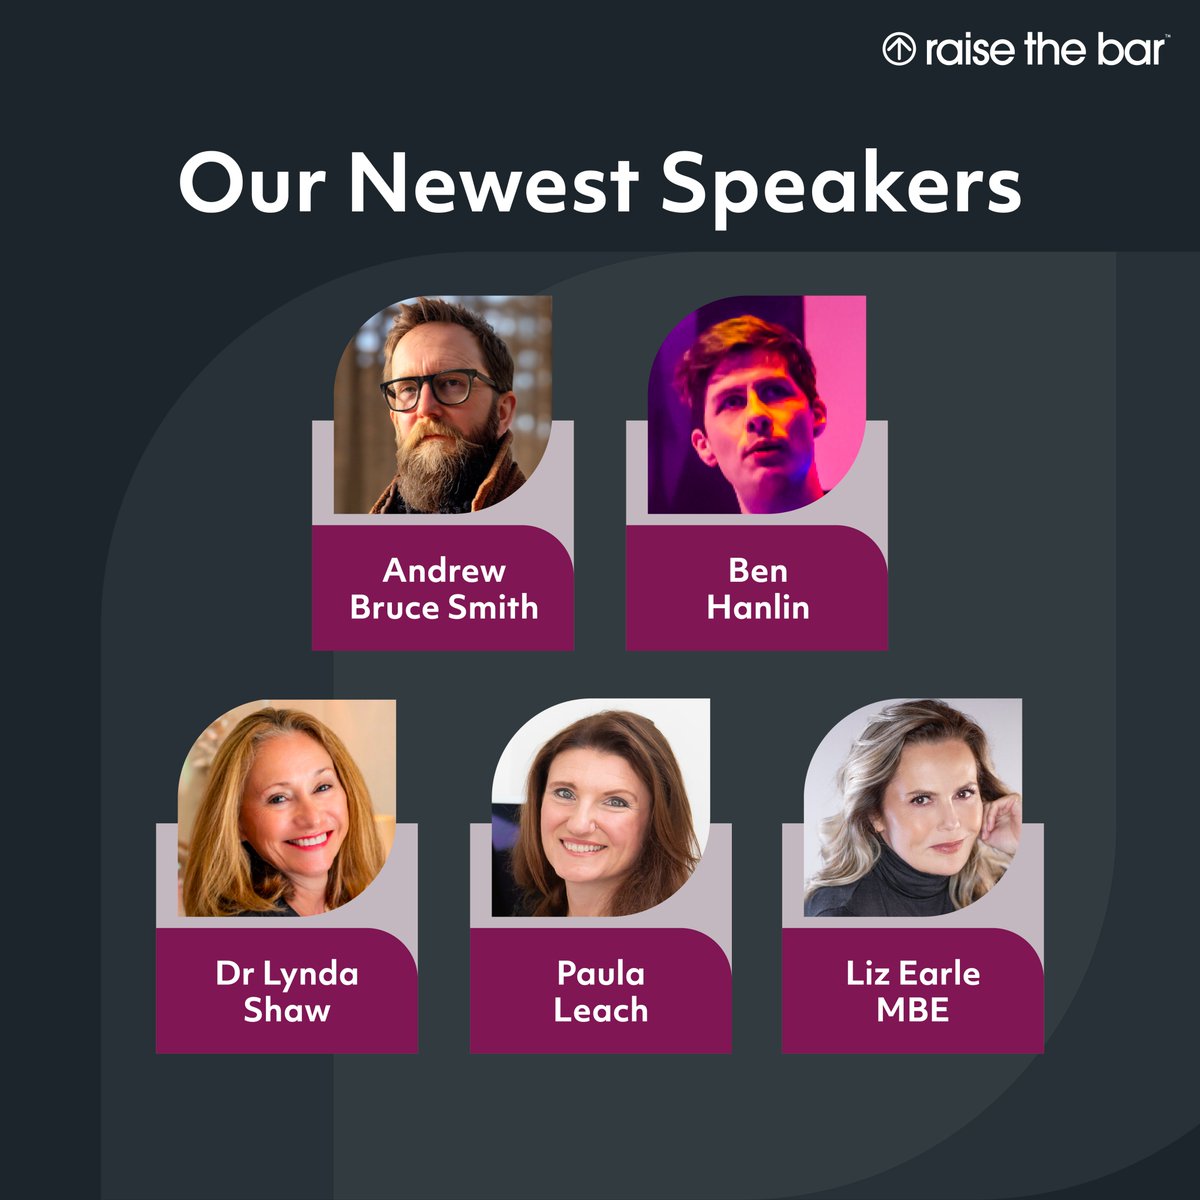 We are delighted to announce our newest speakers! 🌟 Andrew Bruce Smith 🌟 Ben Hanlin 🌟 Dr Lynda Shaw 🌟 Paula Leach 🌟 Liz Earle MBE Our Speakers 👉 zurl.co/ZTiC